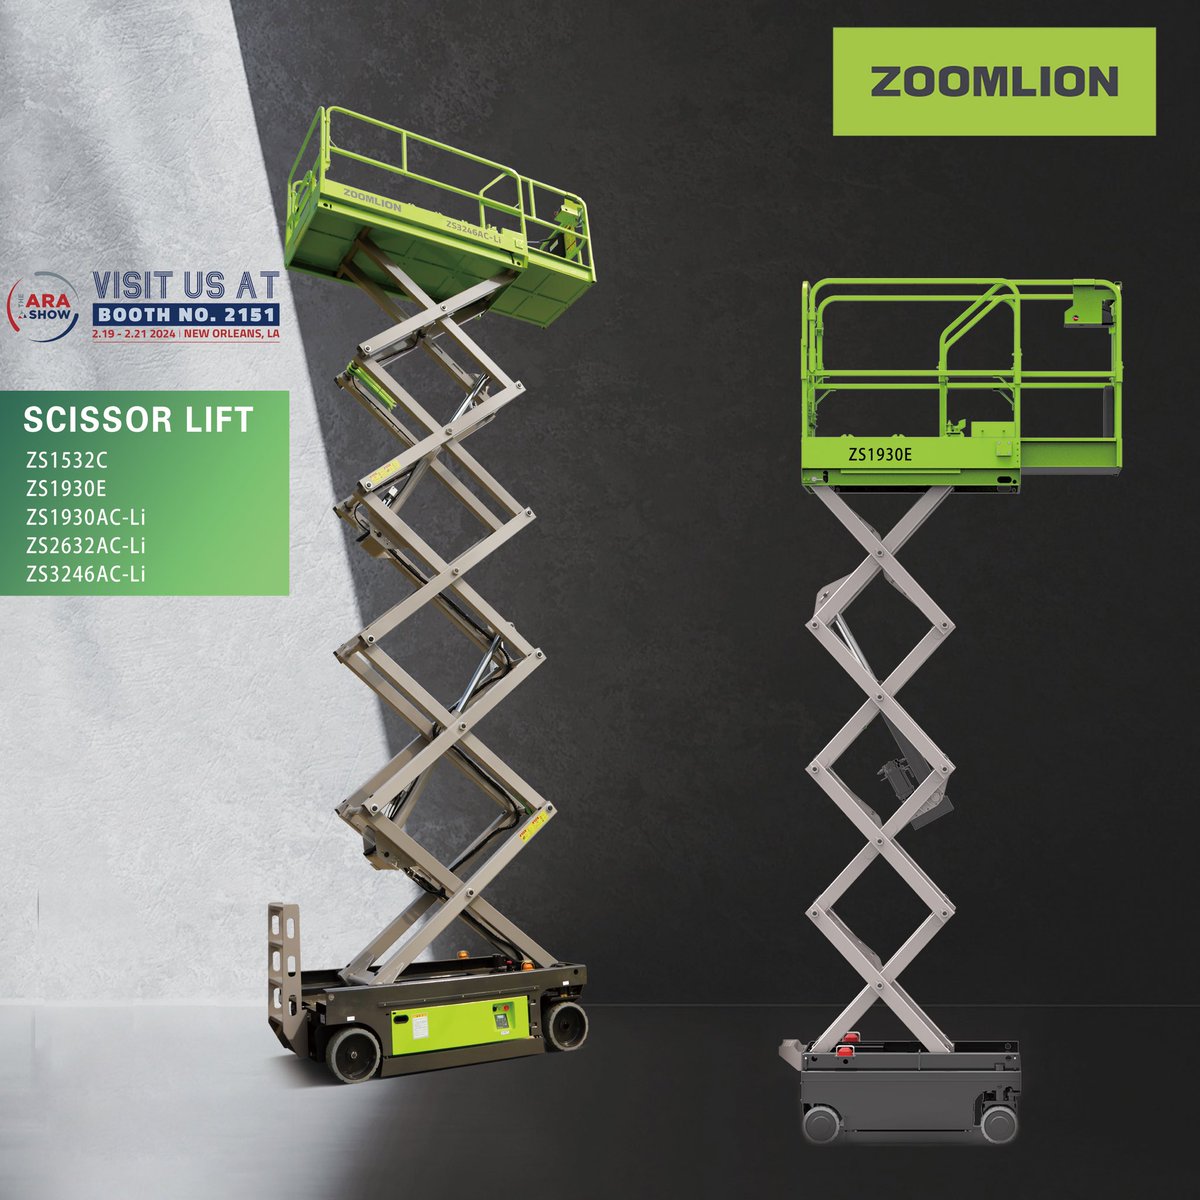 ⏰🚀 Just one month to go until the #ARASHOW 2024 in New Orleans, LA! Get ready for an exclusive preview of our cutting-edge scissor lifts. 🏗🌟 #ZOOMLIONACCESS is set to redefine efficiency and innovation. Don't miss the chance to explore our latest offerings at Booth 2151.